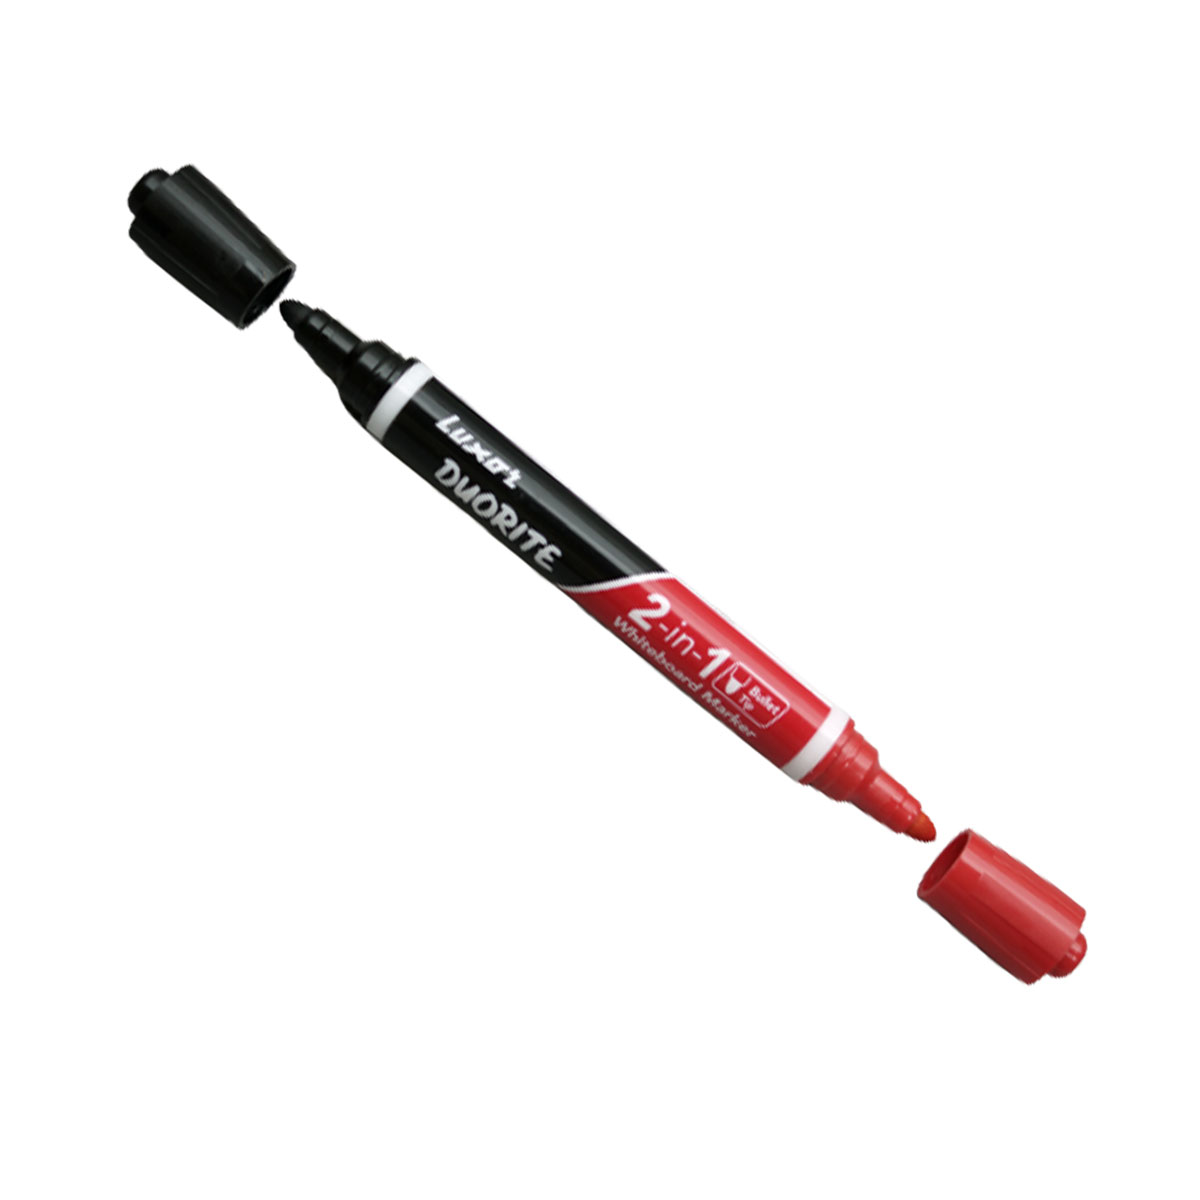 Luxor Duorite 2 in 1 Bullet Tip Black and Red White Board Marker SKU 20069